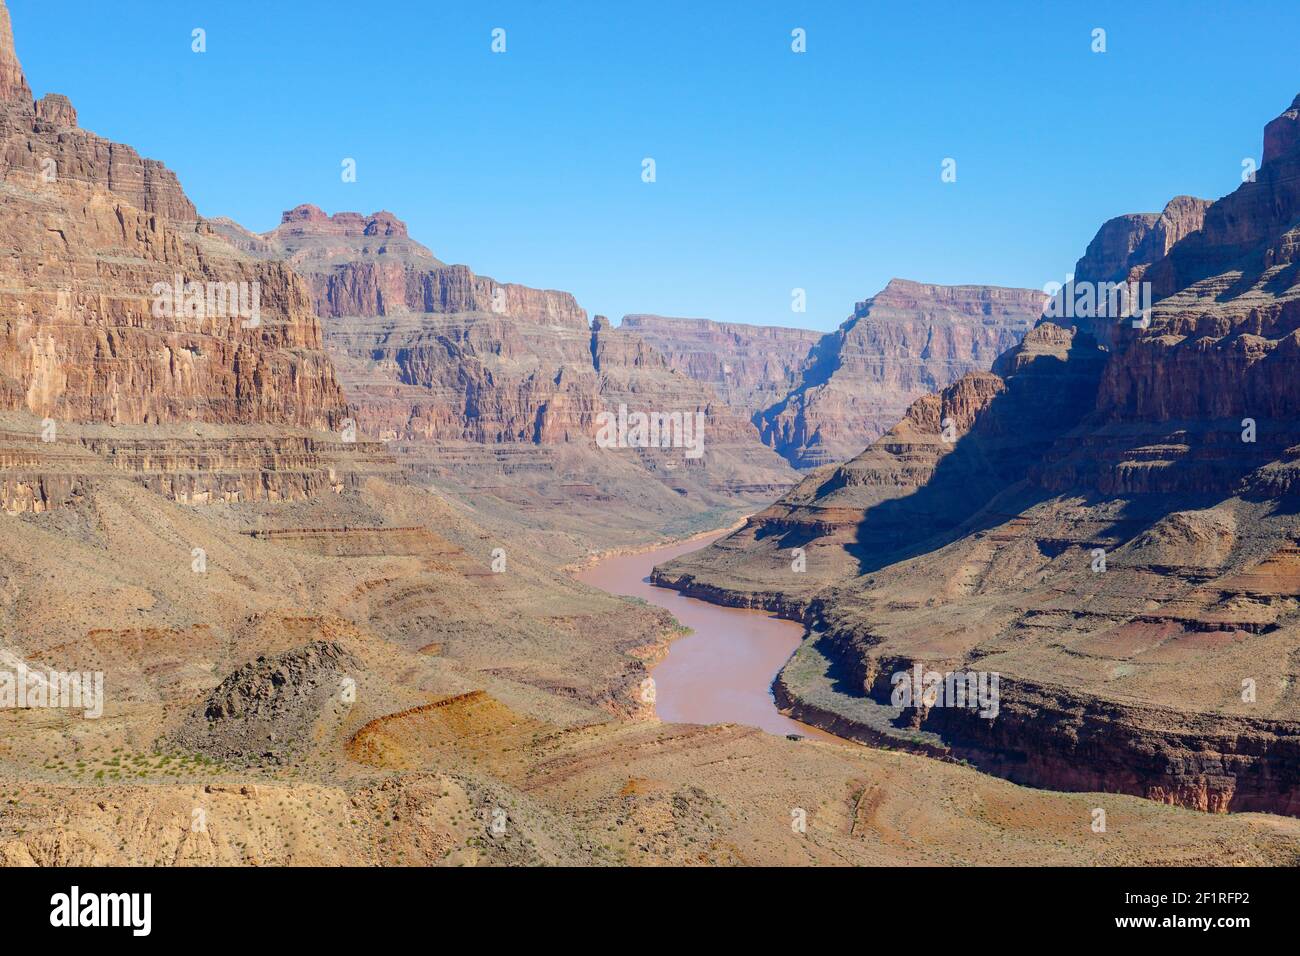 Landscape view of Grand Canyon National Park with Colorado river during sunny day. Arizona, USA Stock Photo